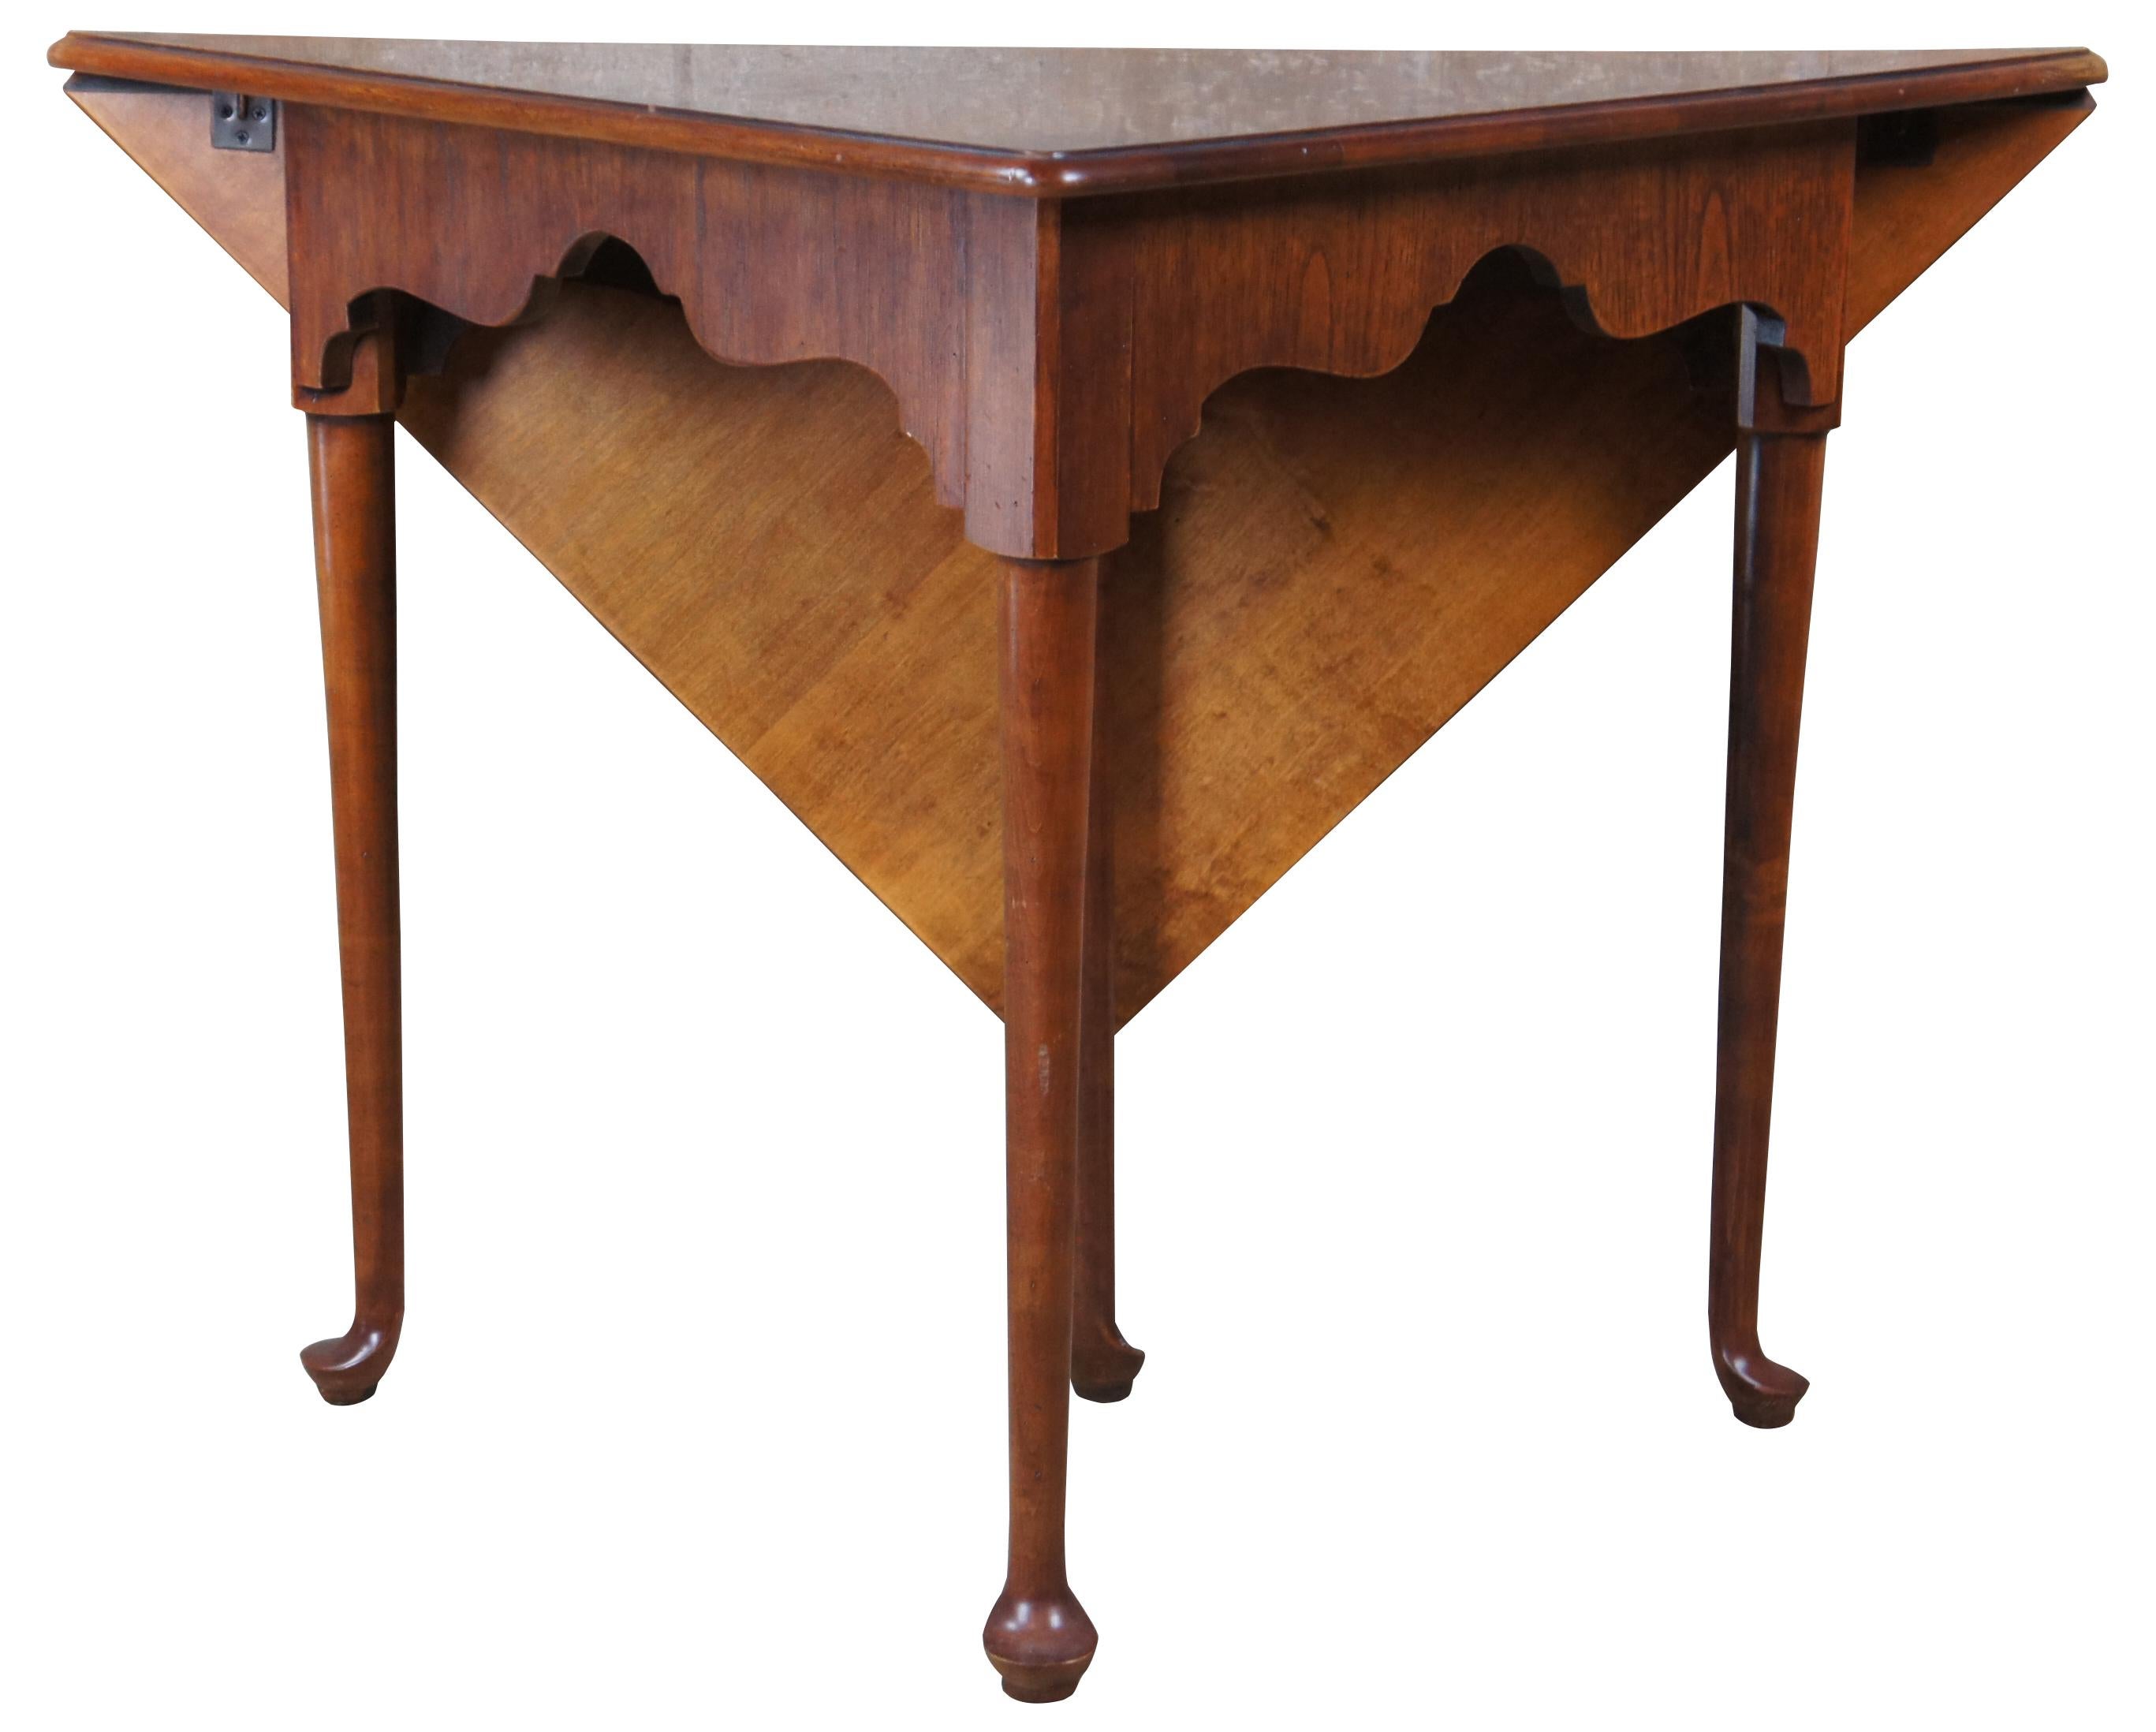 Handkerchief table by Hekman Furniture Co, 5-2015, circa 1980s . Drawing inspiration from Colonial Williamsburg and Queen Anne styling. Features a triangular top of olive ash burl over carved aprons and long tapered legs leading to pad feet. Back